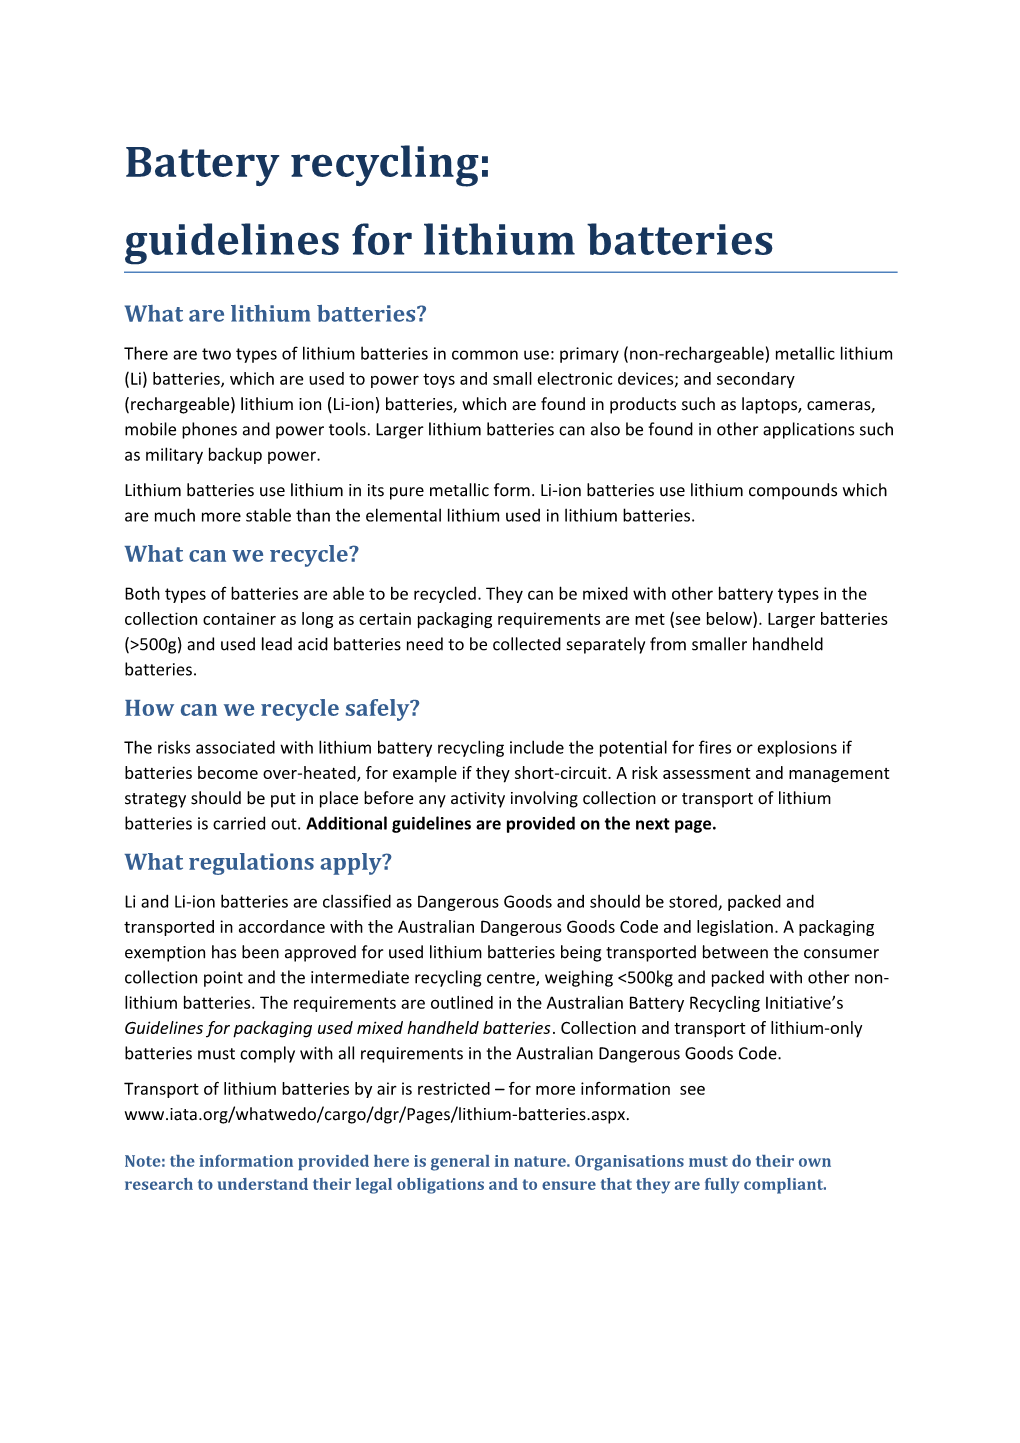 What Are Lithium Batteries?